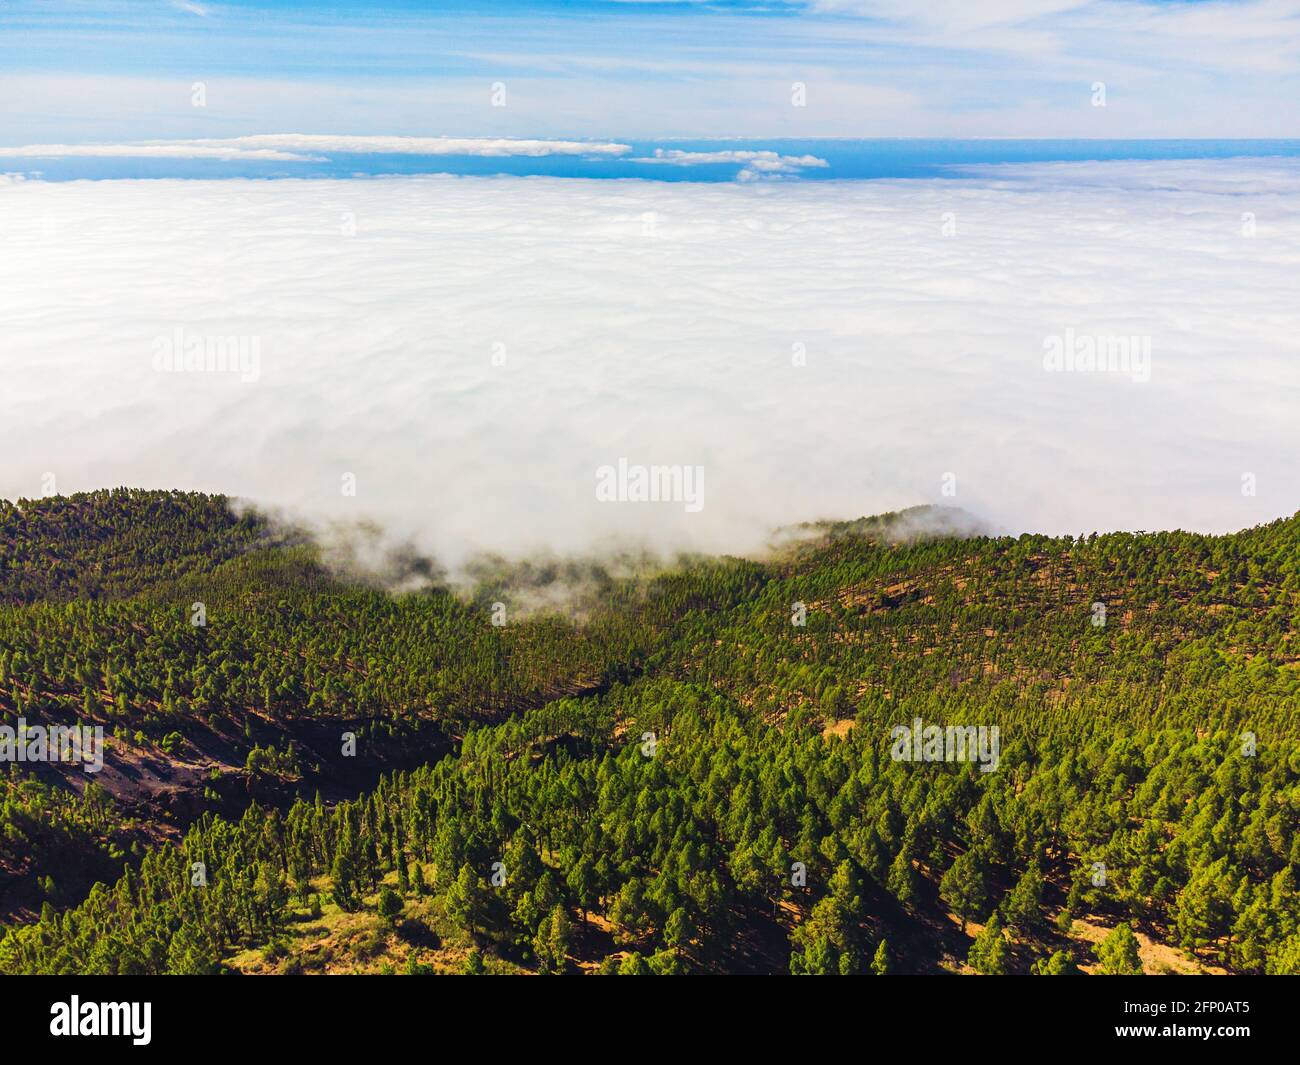 Mountain trail above the clouds on La Palma island. Aerial view. Stock Photo